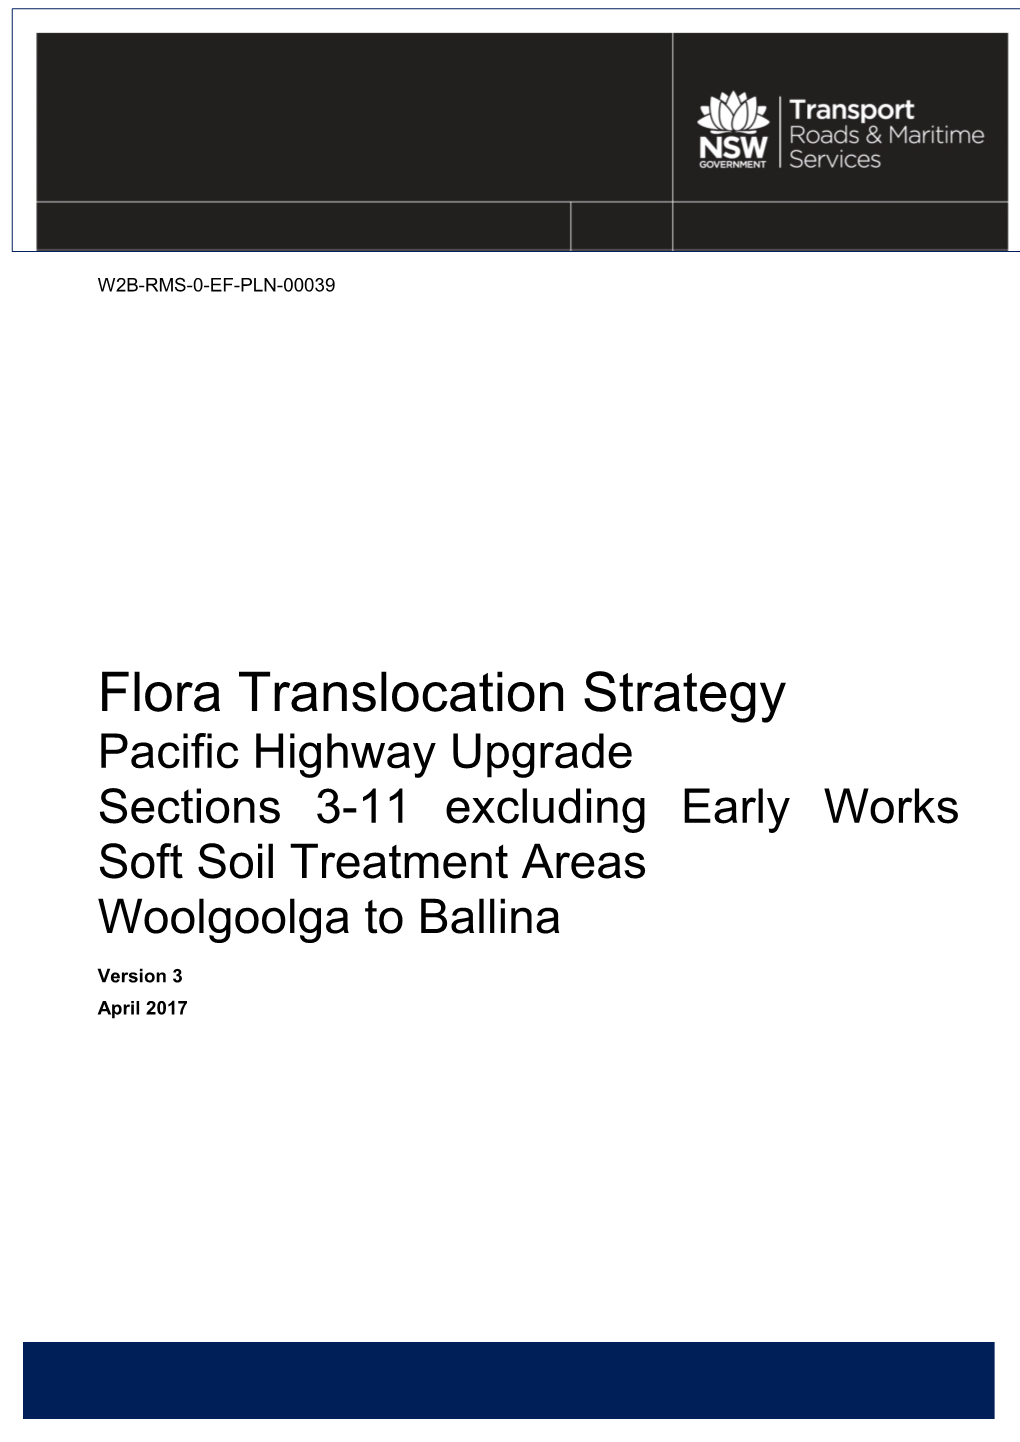 Flora Translocation Strategy Pacific Highway Upgrade Sections 3-11 Excluding Early Works Soft Soil Treatment Areas Woolgoolga to Ballina